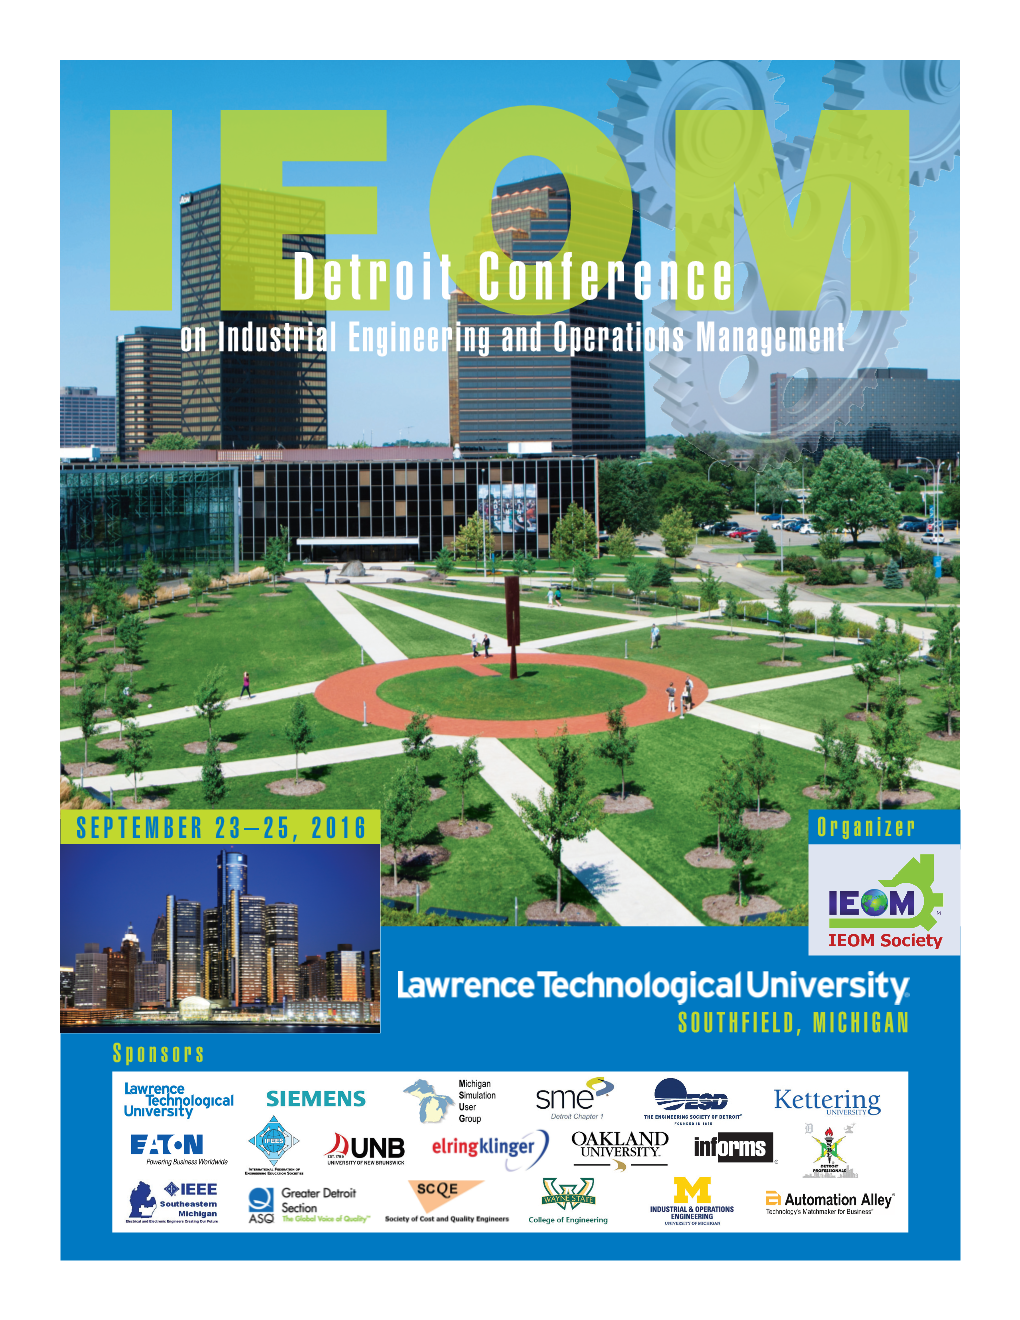 Detroit Conference Ieomon Industrial Engineering and Operations Management